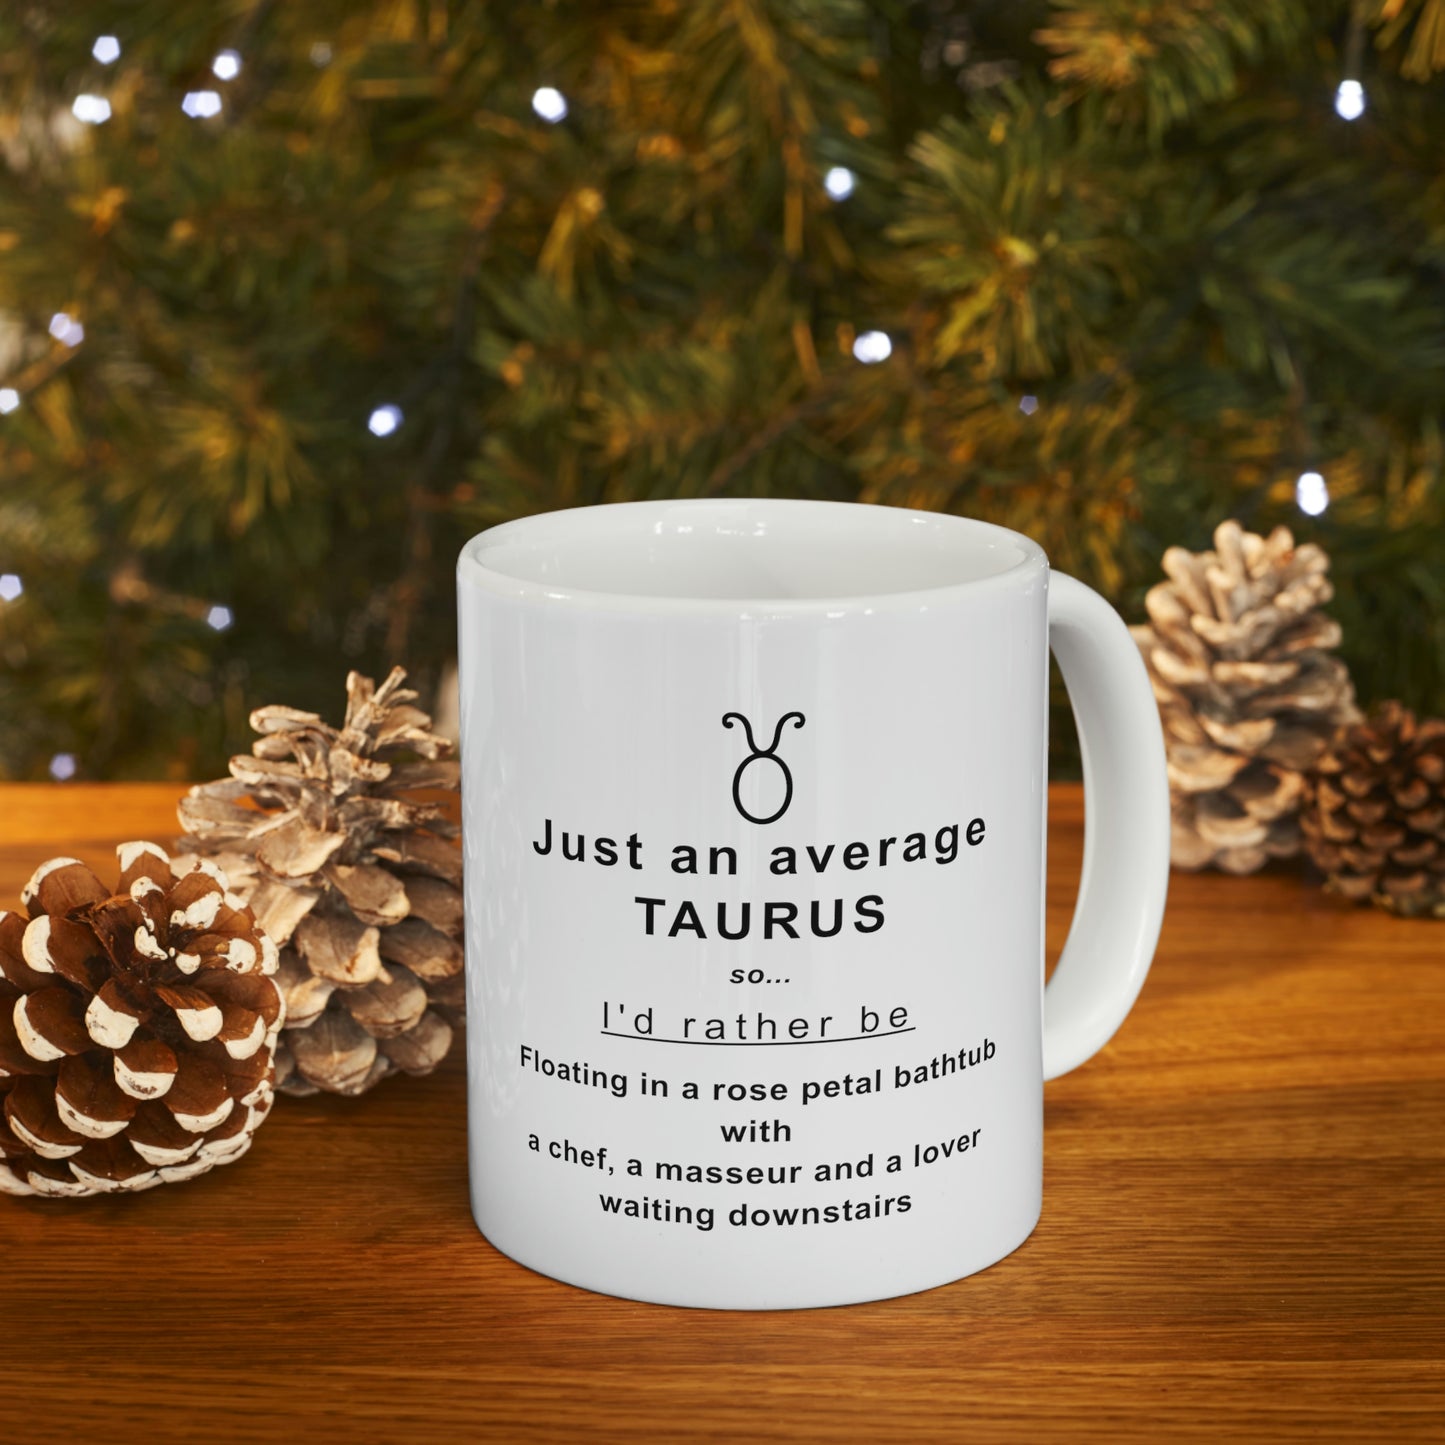 Taurus Mug: I'd rather be floating in a bathtub with rose petals... - full text in description